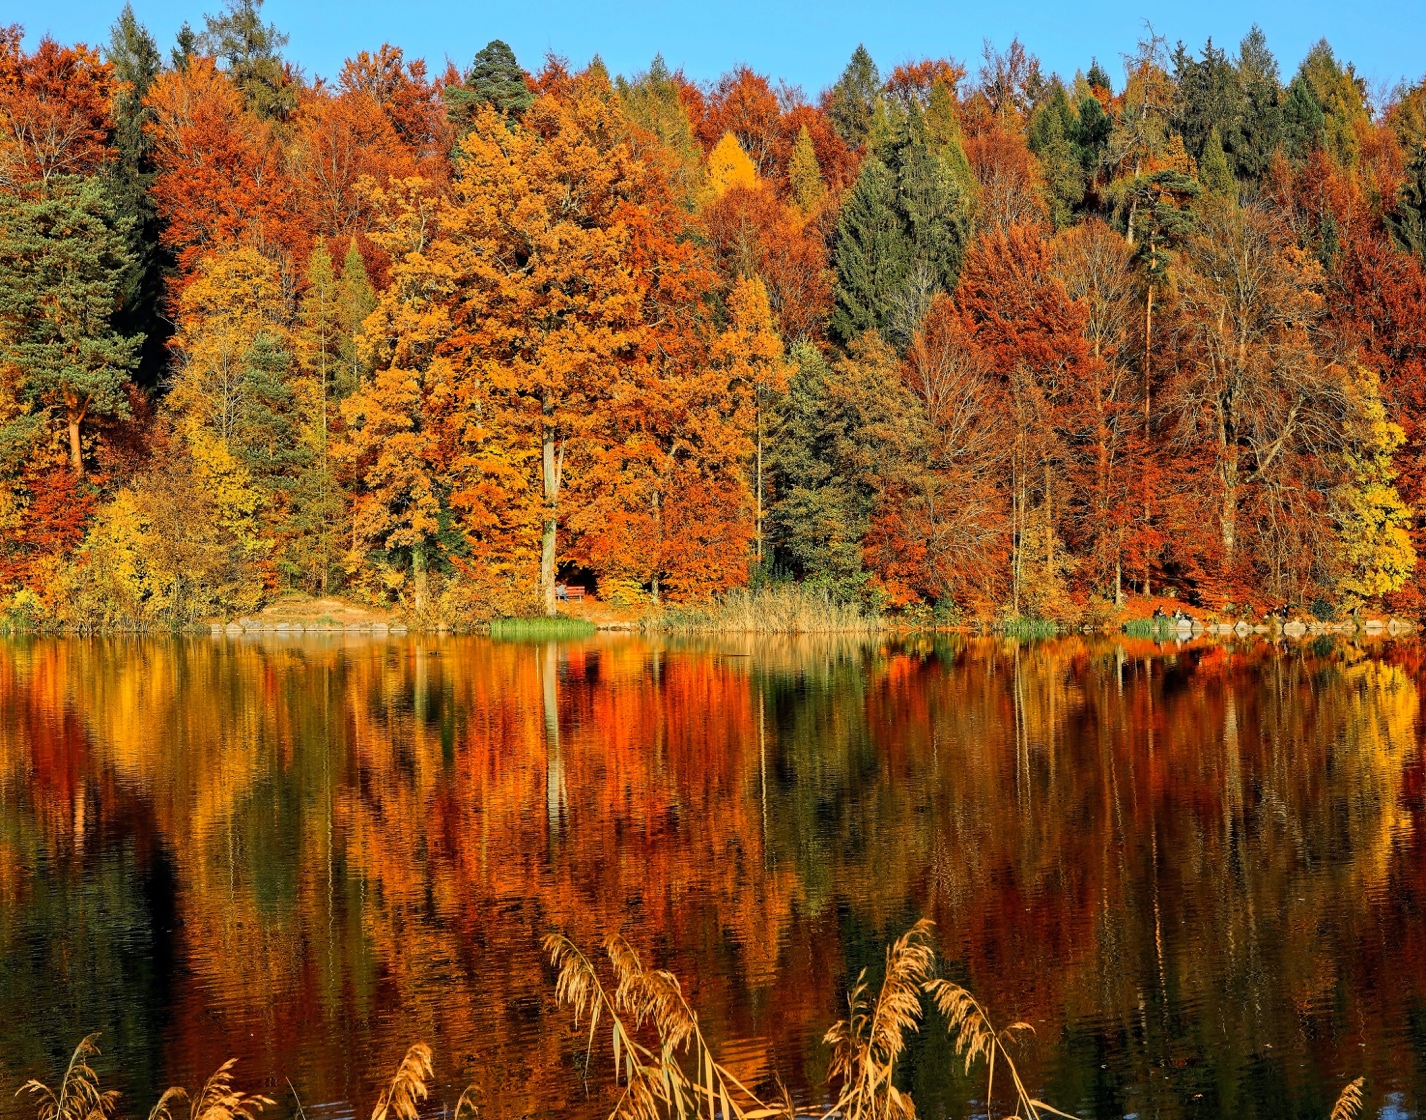 A lake with trees and leaves

Description automatically generated with medium confidence